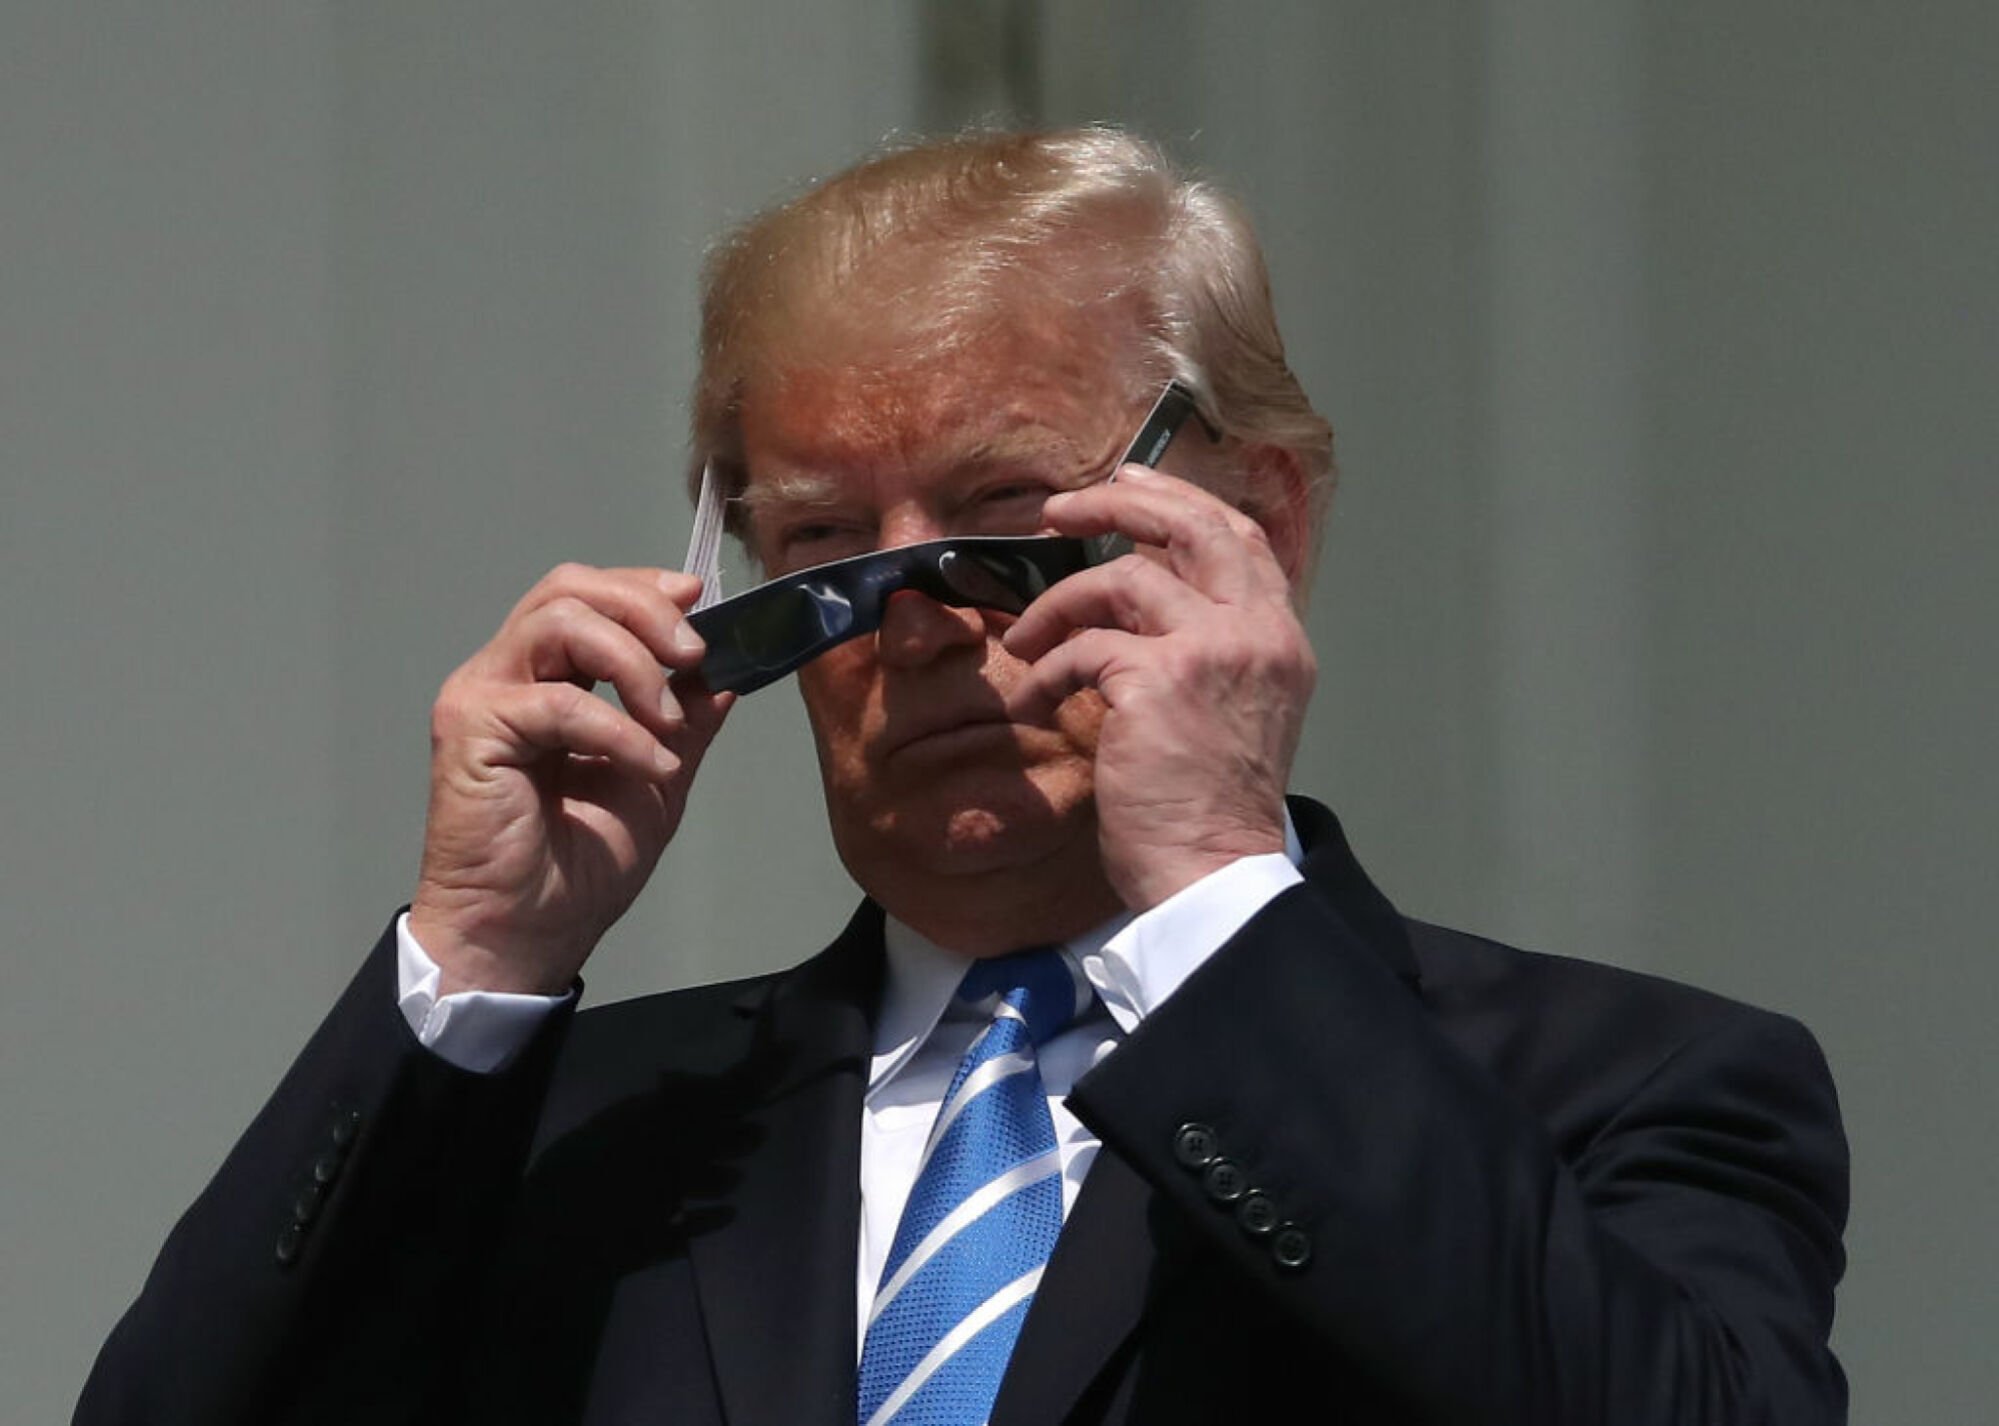 President Donald Trump putting on solar eclipse filters